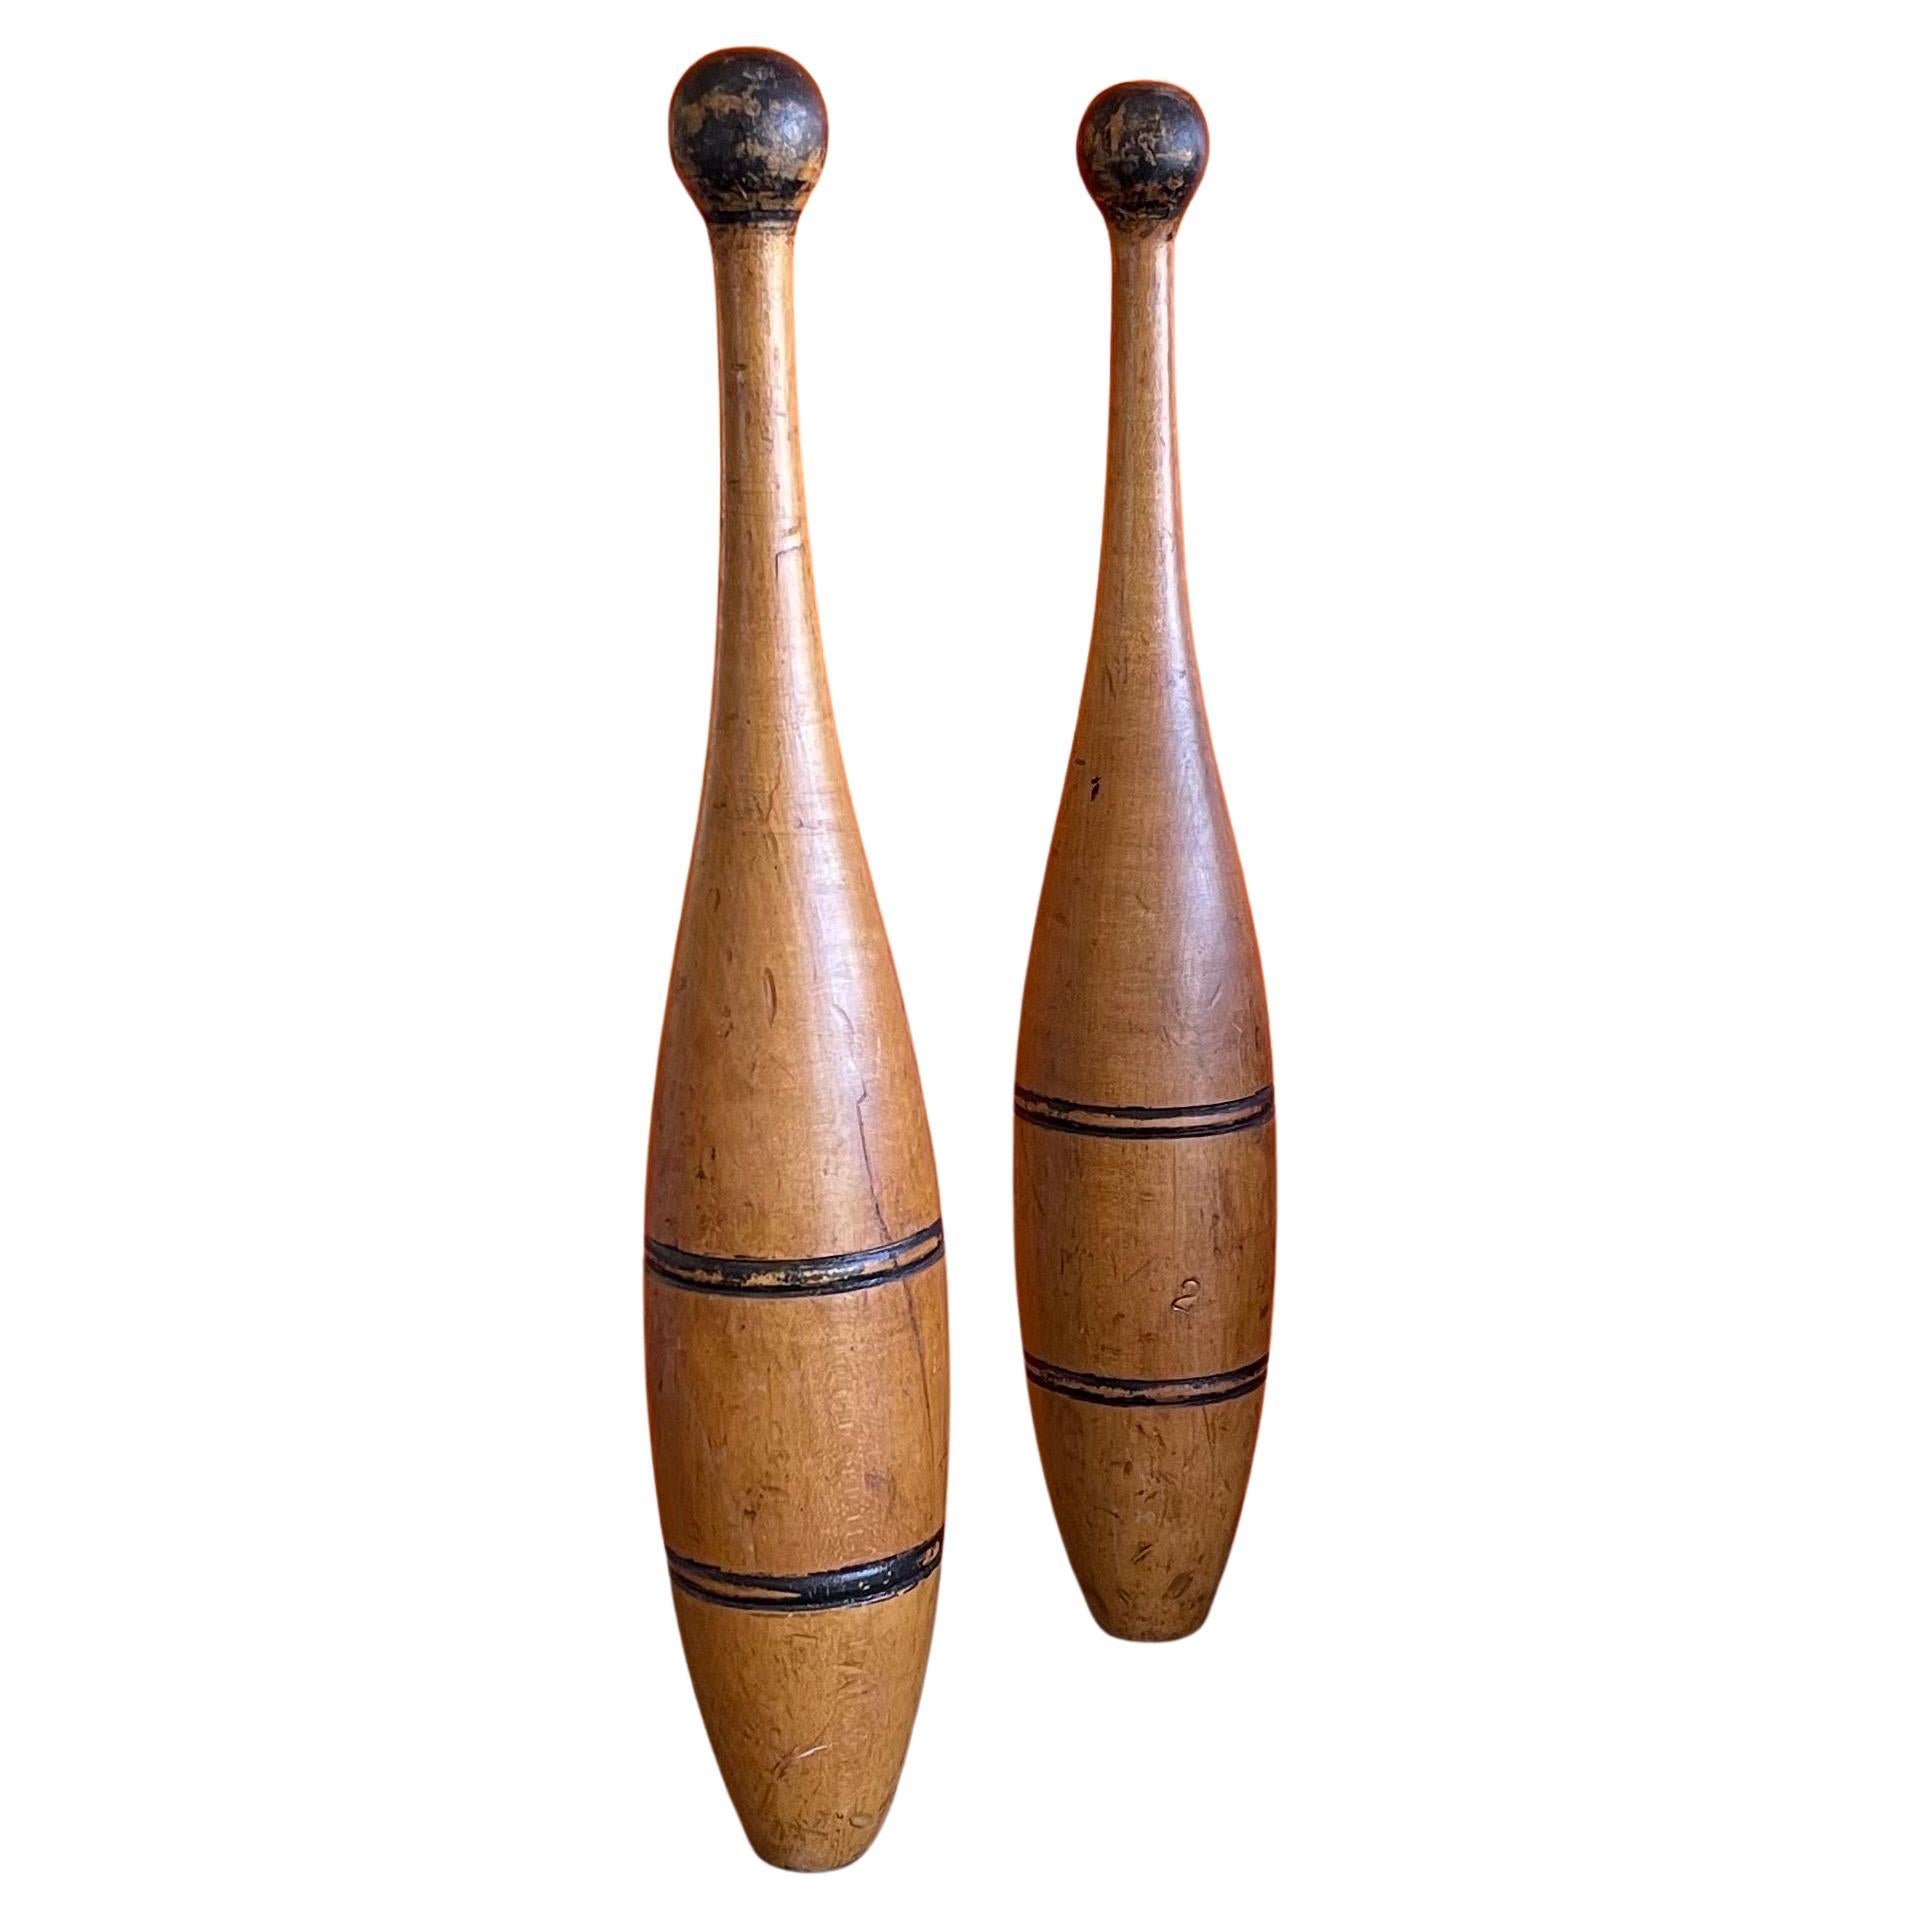 A very nice pair of  antique hardwood juggling pins, circa 1900s.  The pair are in good vintage condition and measure 3.5